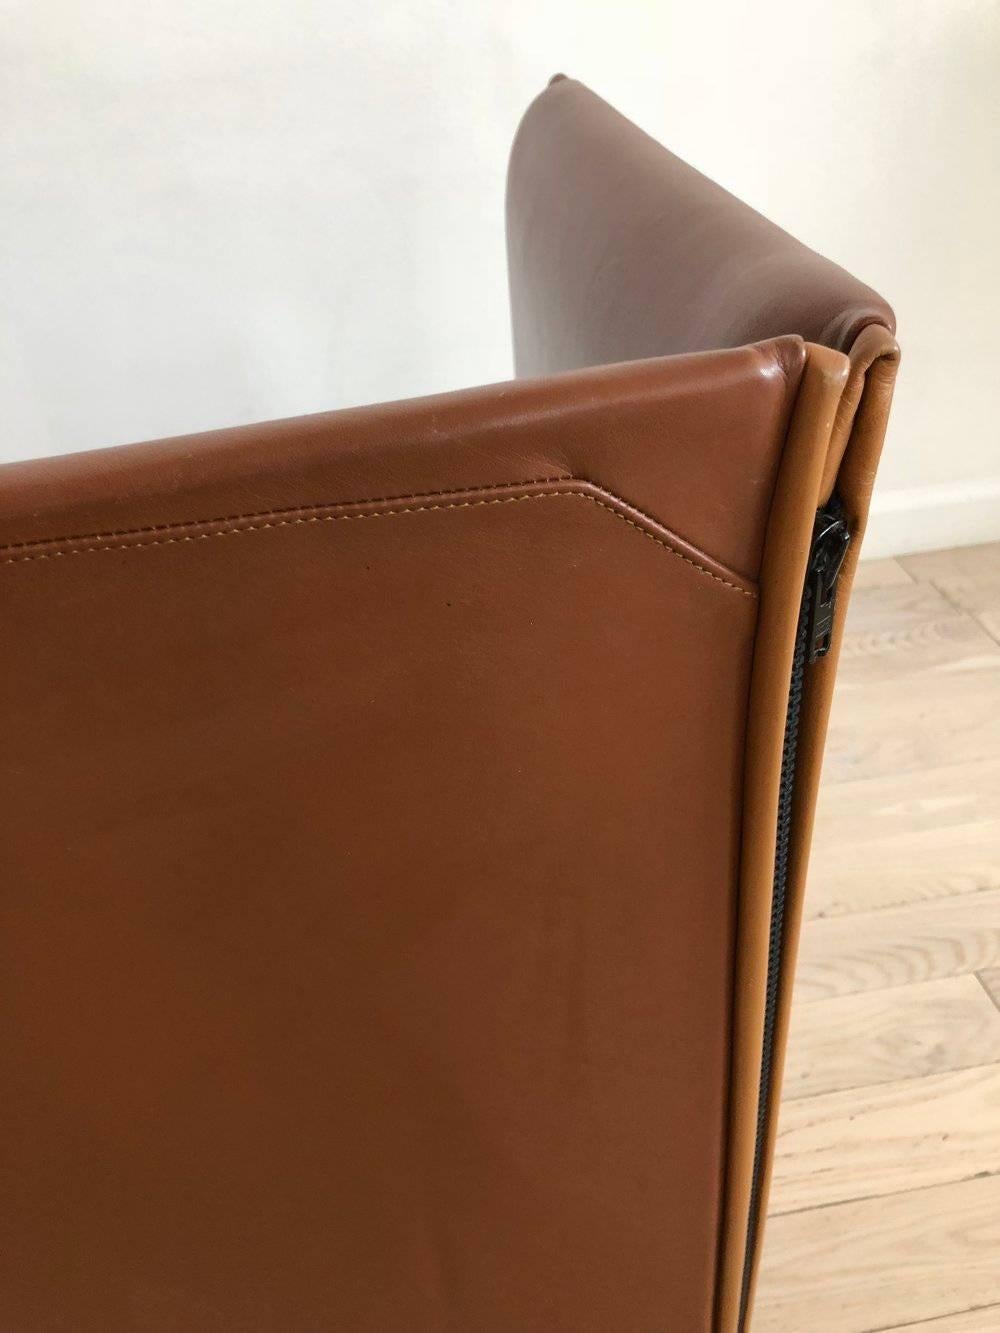 1976 401 Break Chair by Mario Bellini for Cassina, Brown Leather 2